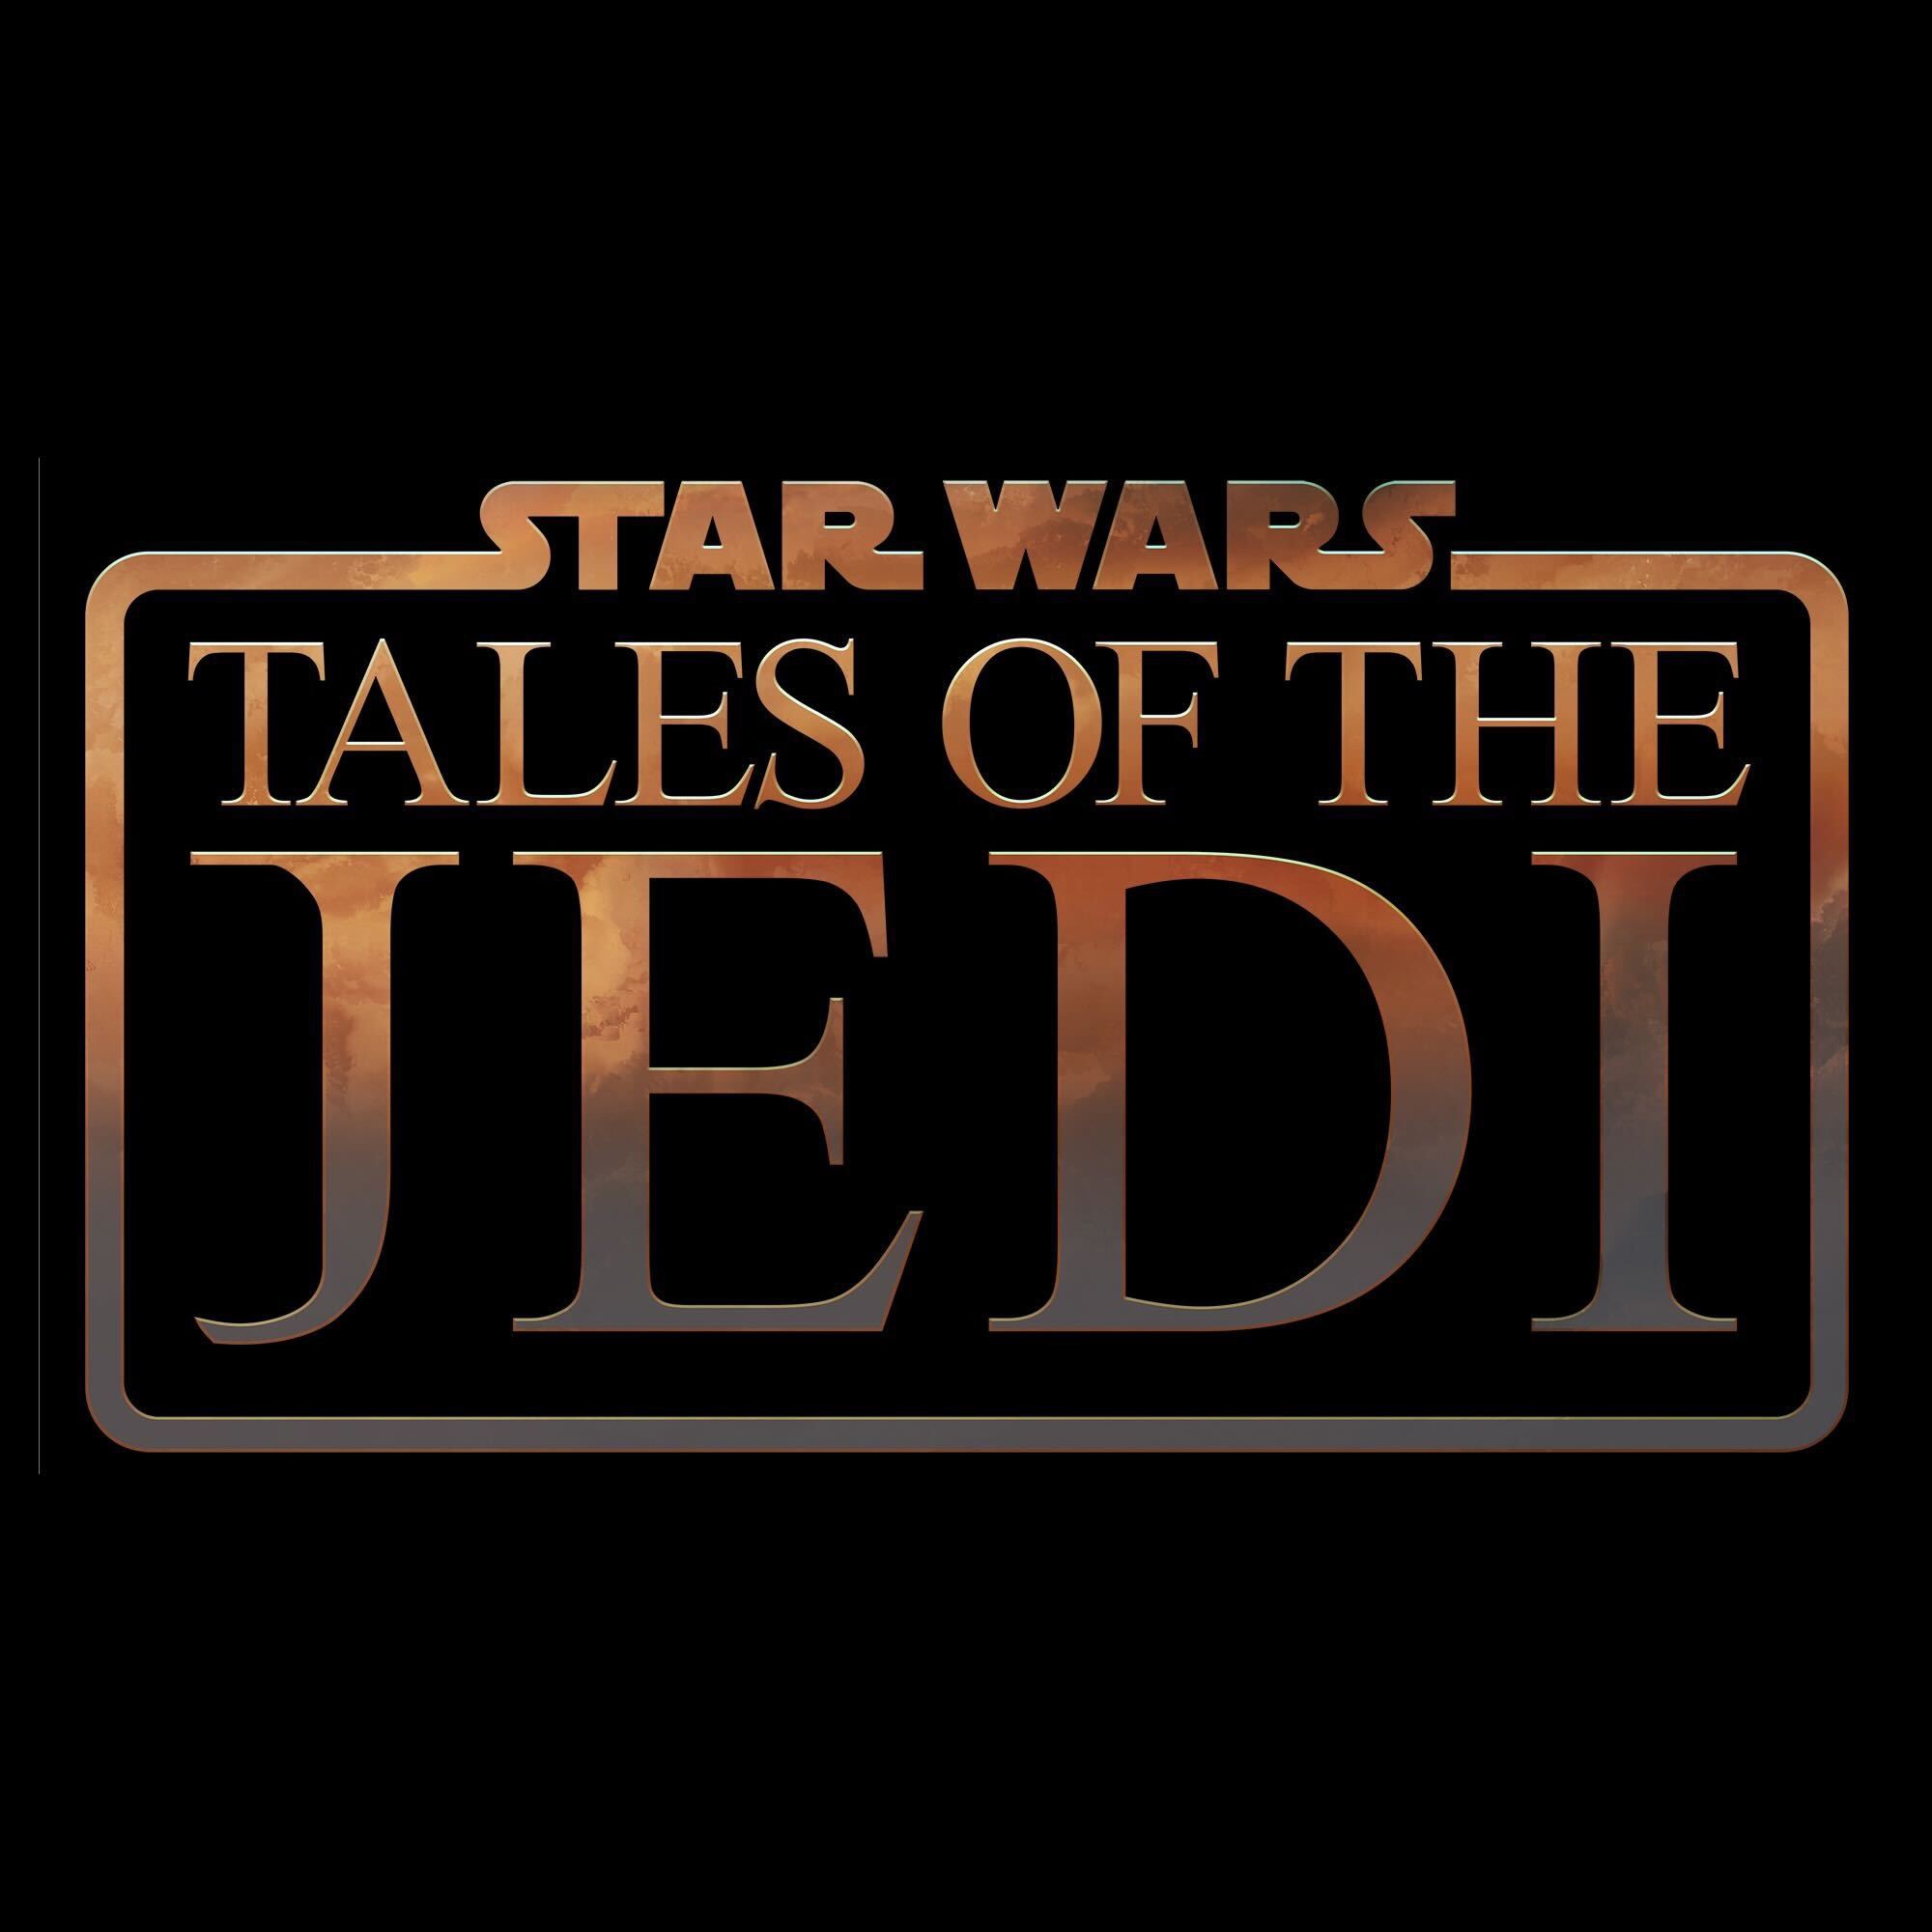 'Star Wars: Tales of the Jedi' animated series announced for 2022